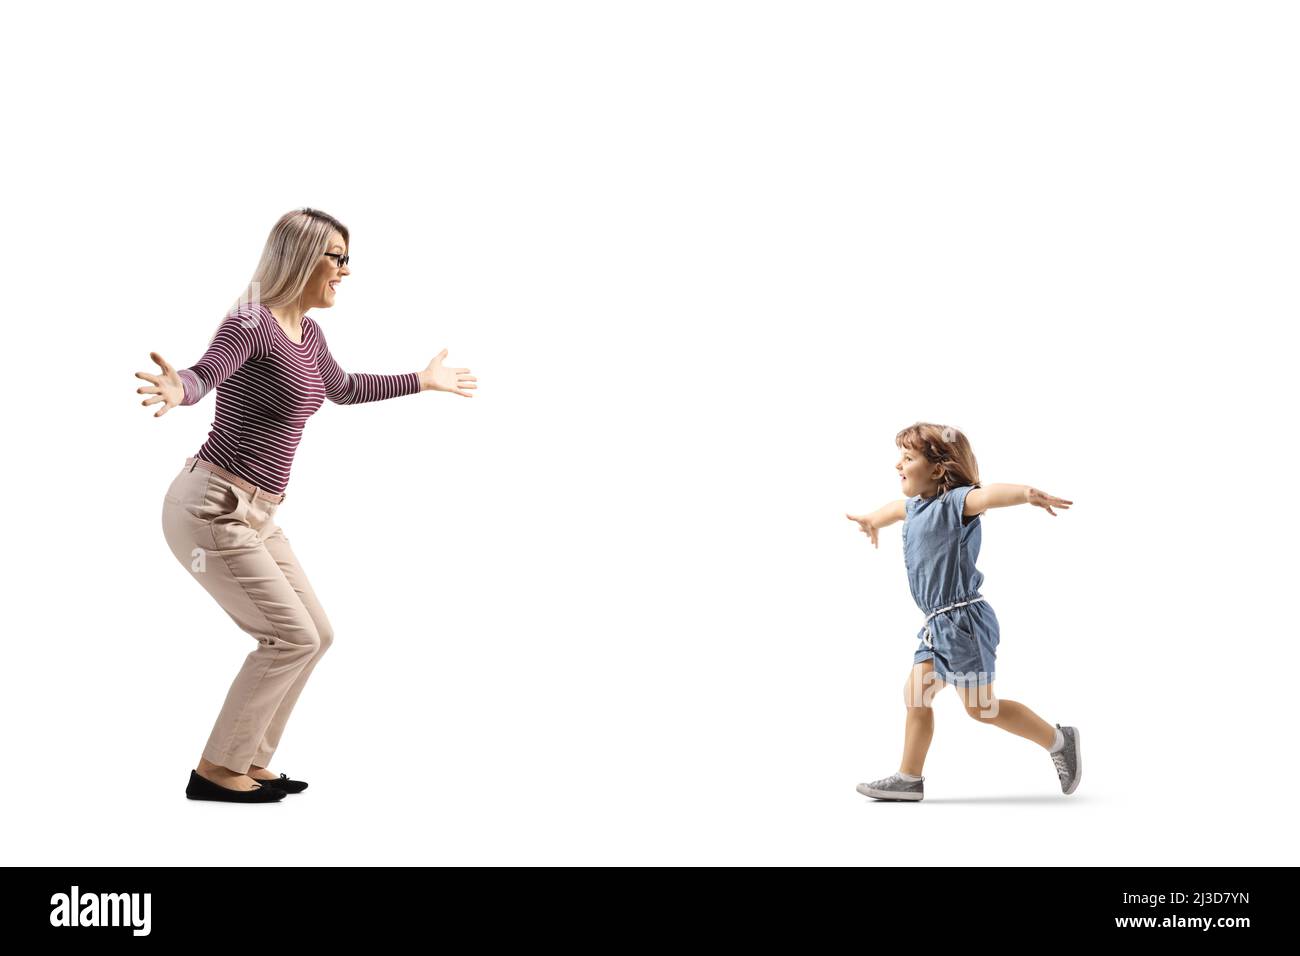 Full length profile shot of a child running towards mother isolated on white background Stock Photo